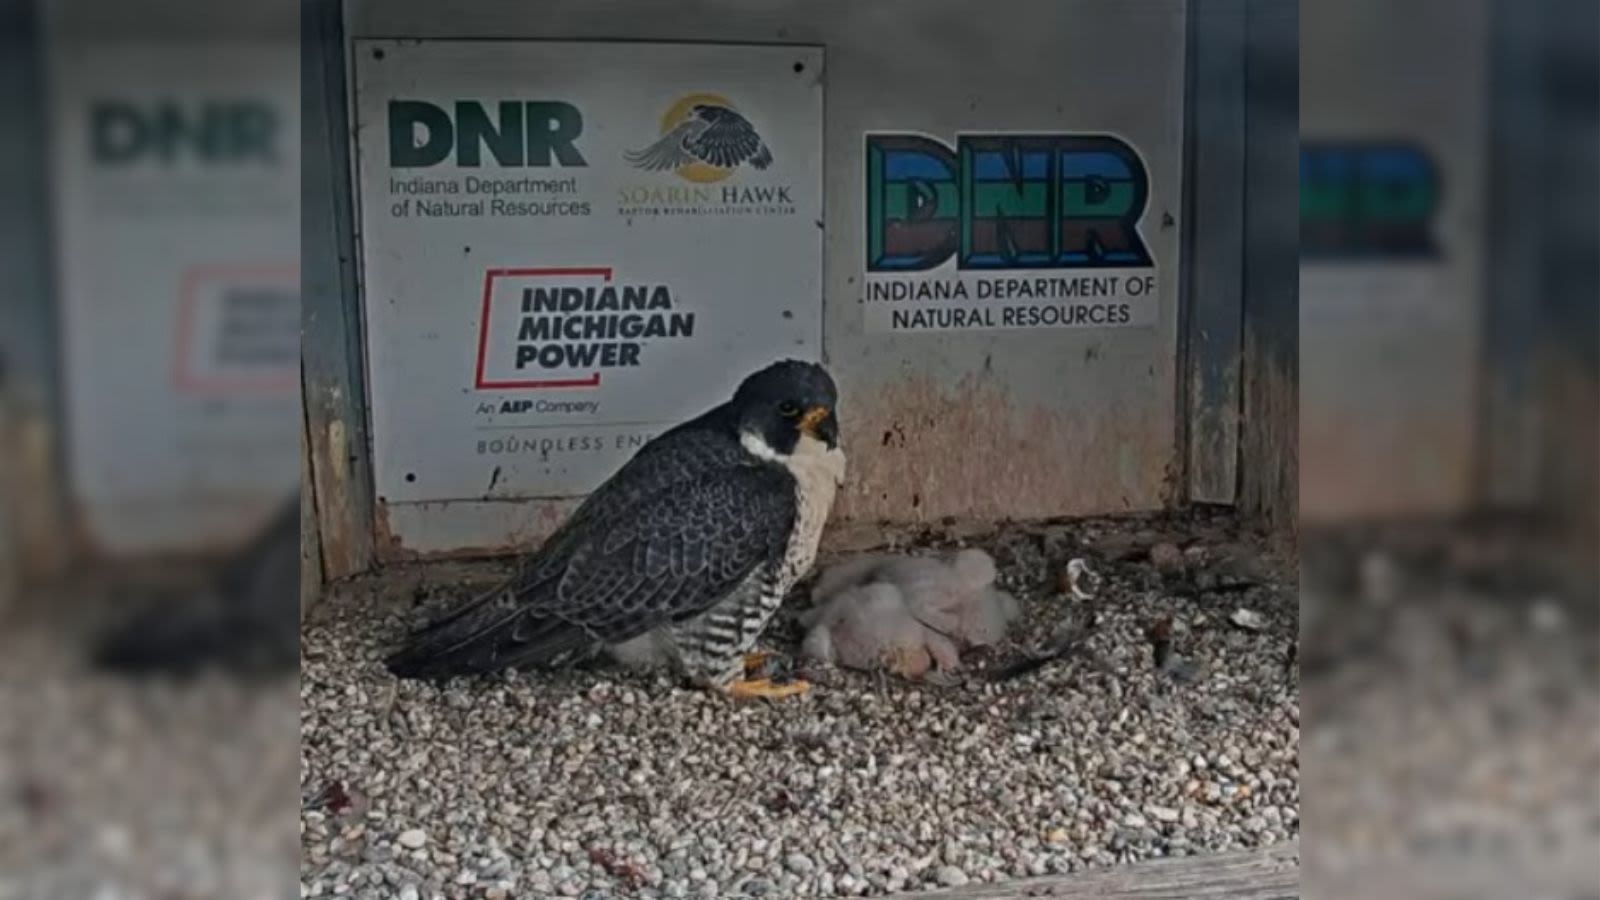 Indiana Michigan Power need help naming falcon chicks on tallest building in Fort Wayne